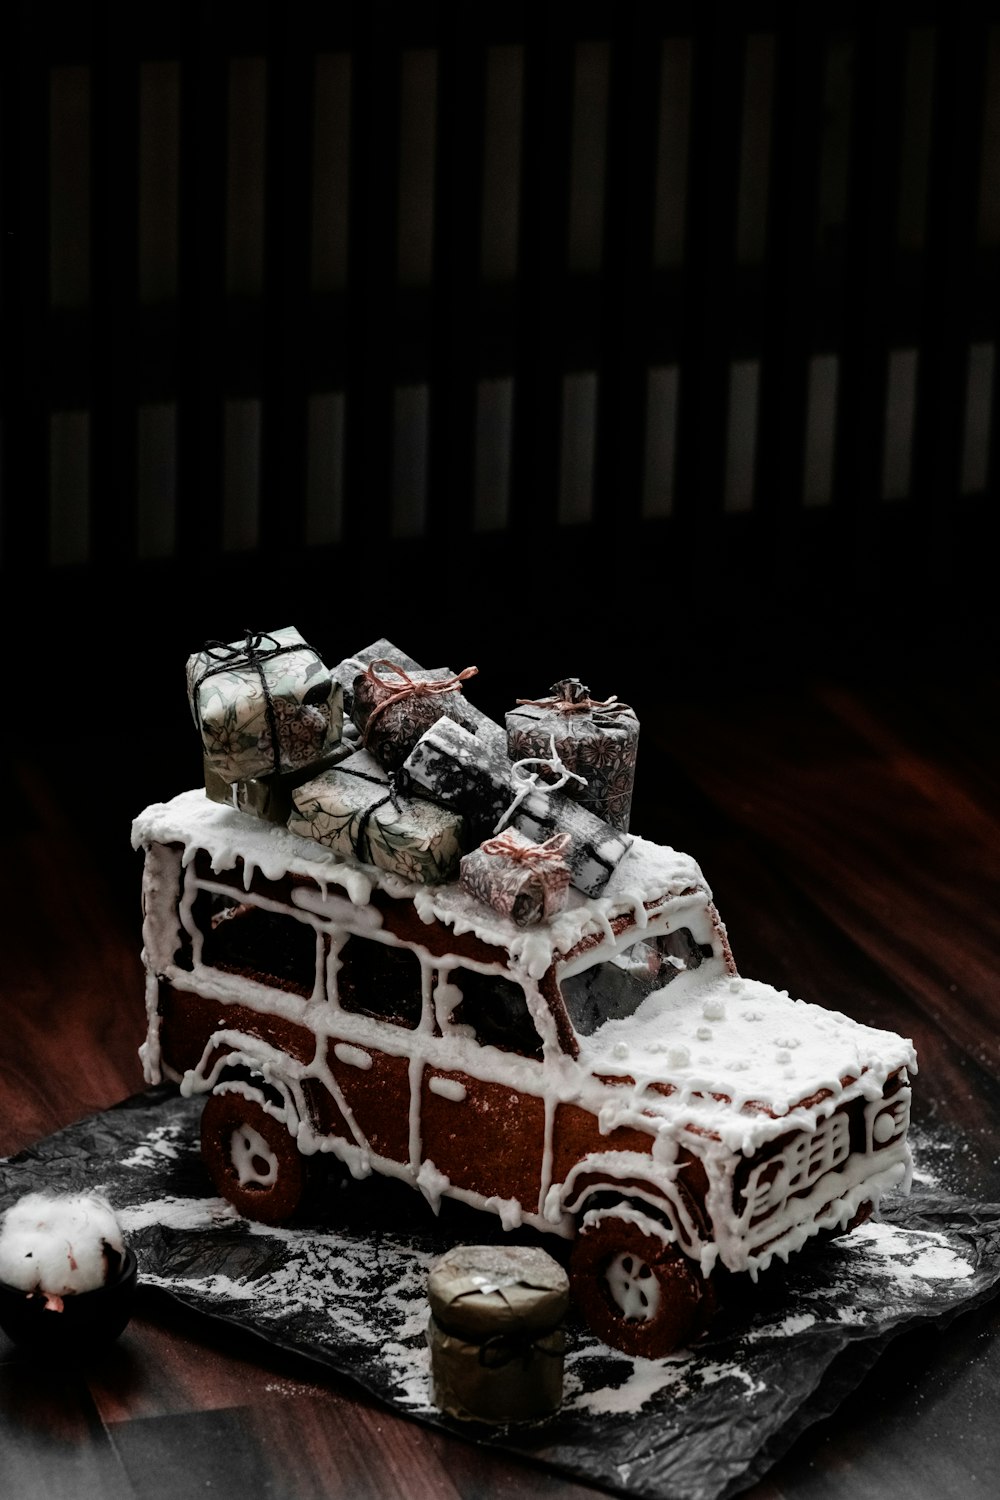 a cake made to look like a fire truck